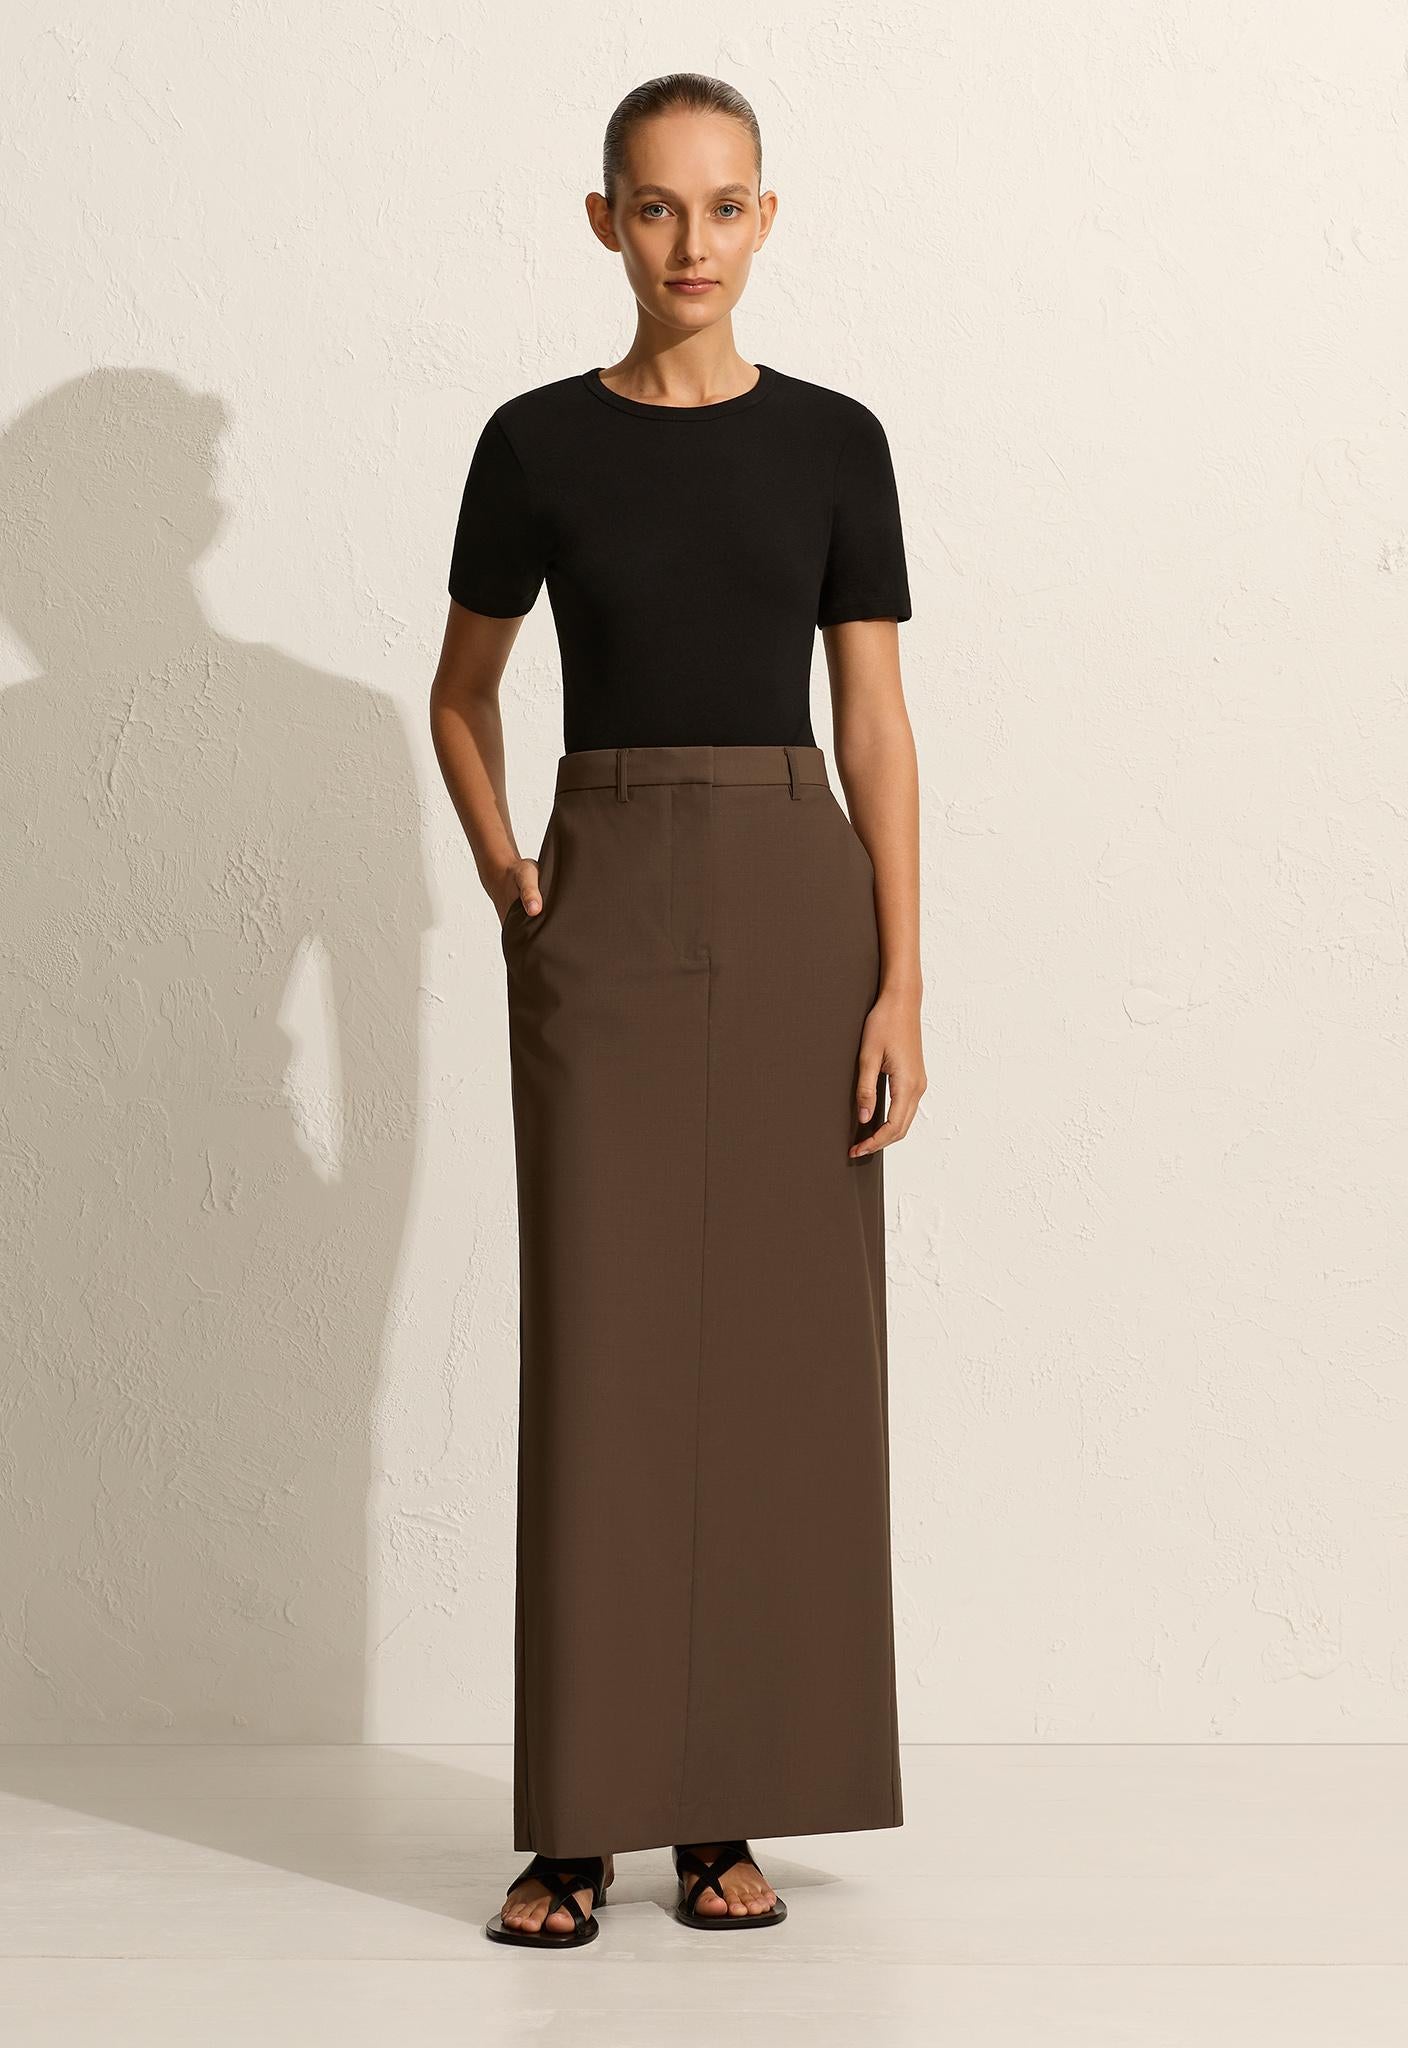 Relaxed Tailored Skirt - Coffee - Matteau